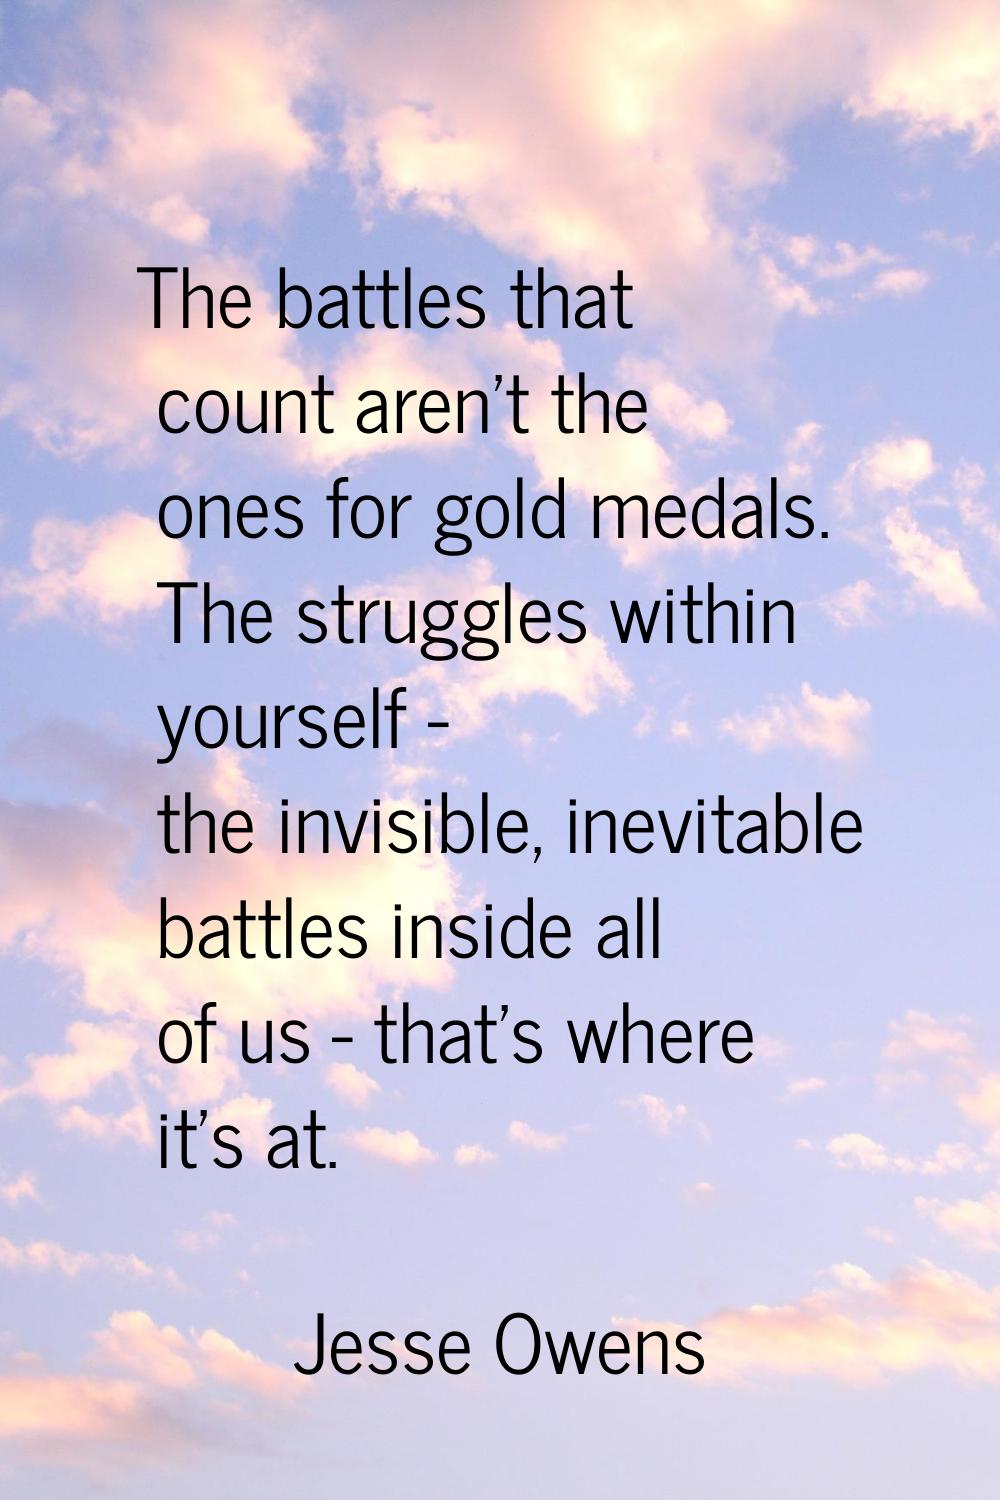 The battles that count aren't the ones for gold medals. The struggles within yourself - the invisib